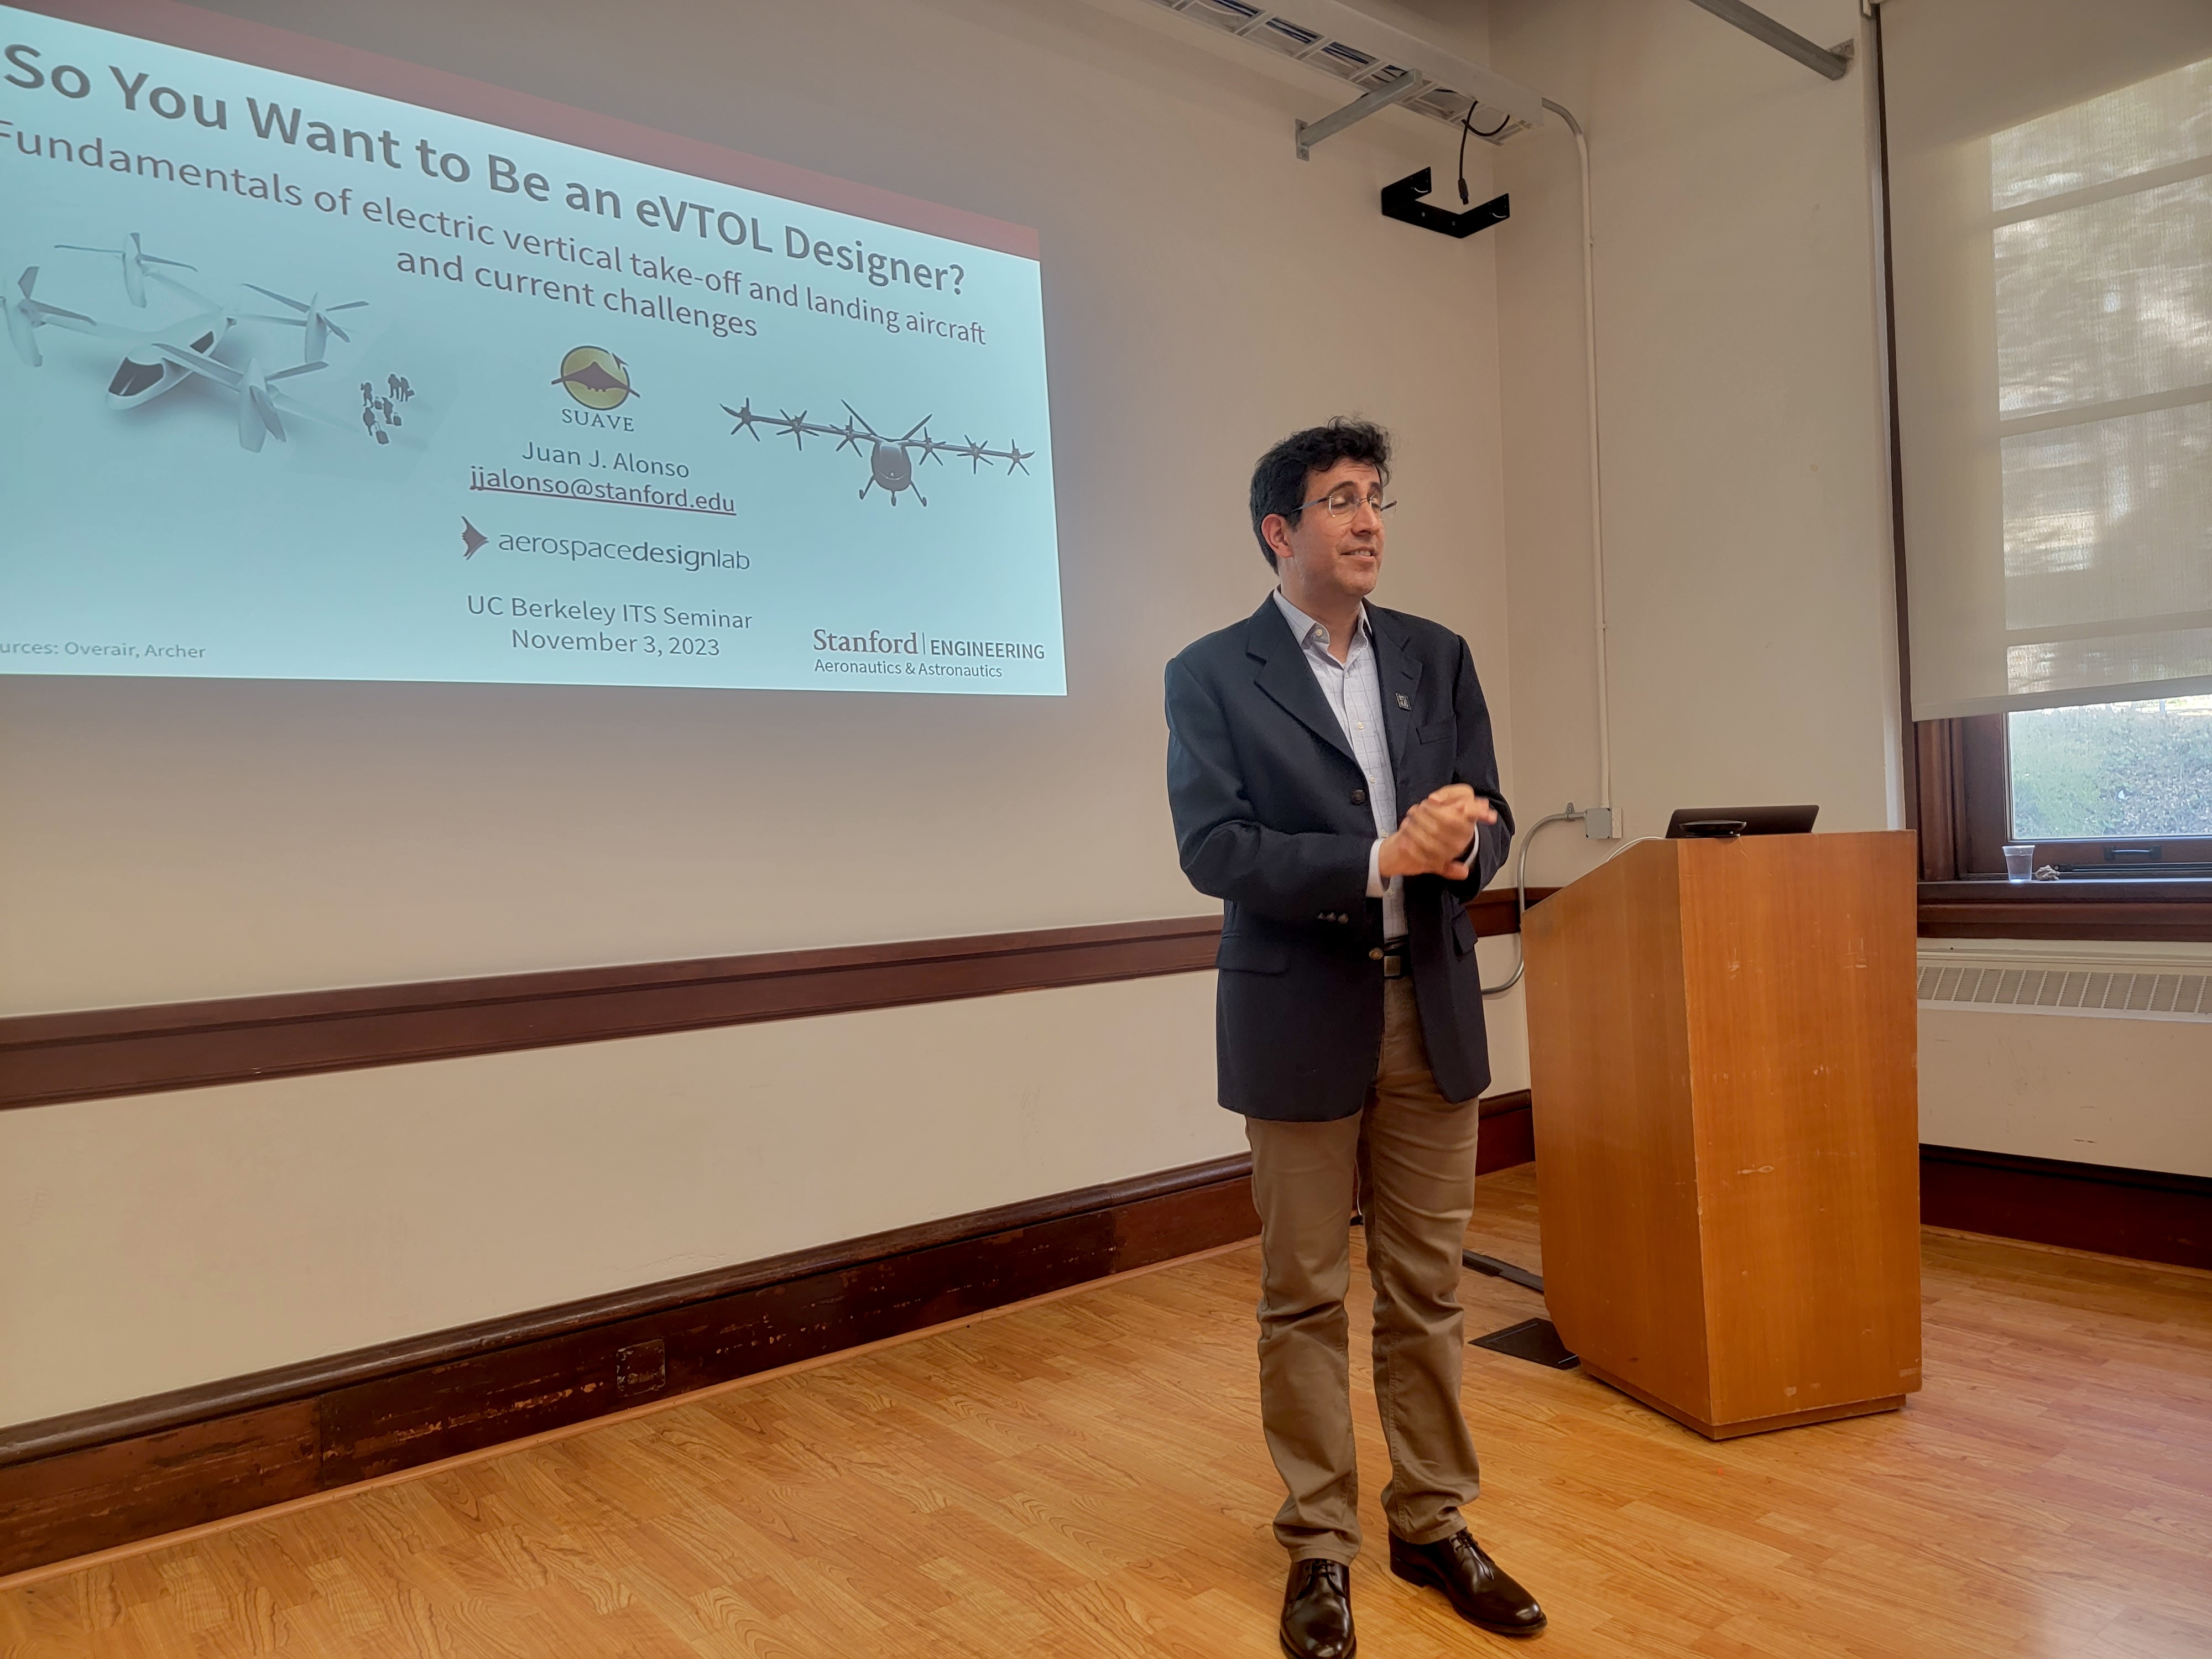 Juan Alonso, Professor and Director of the Aerospace Design Laboratory at Stanford University, presents at the ITS Transportation Seminar